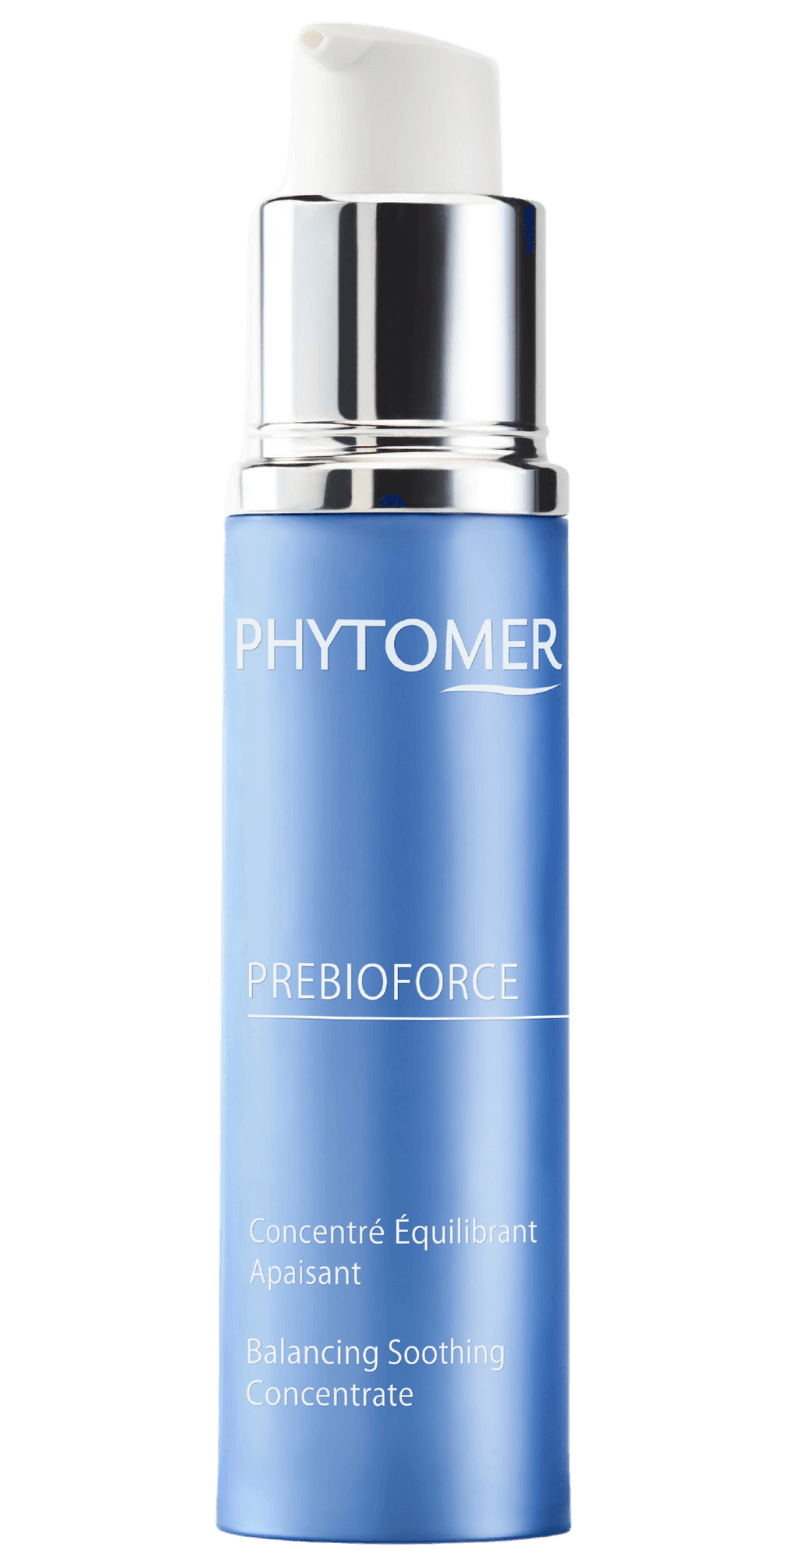 &#39;s Phytomer PREBIOFORCE Balancing Soothing Concentrate - Bellini&#39;s Skin and Parfumerie 